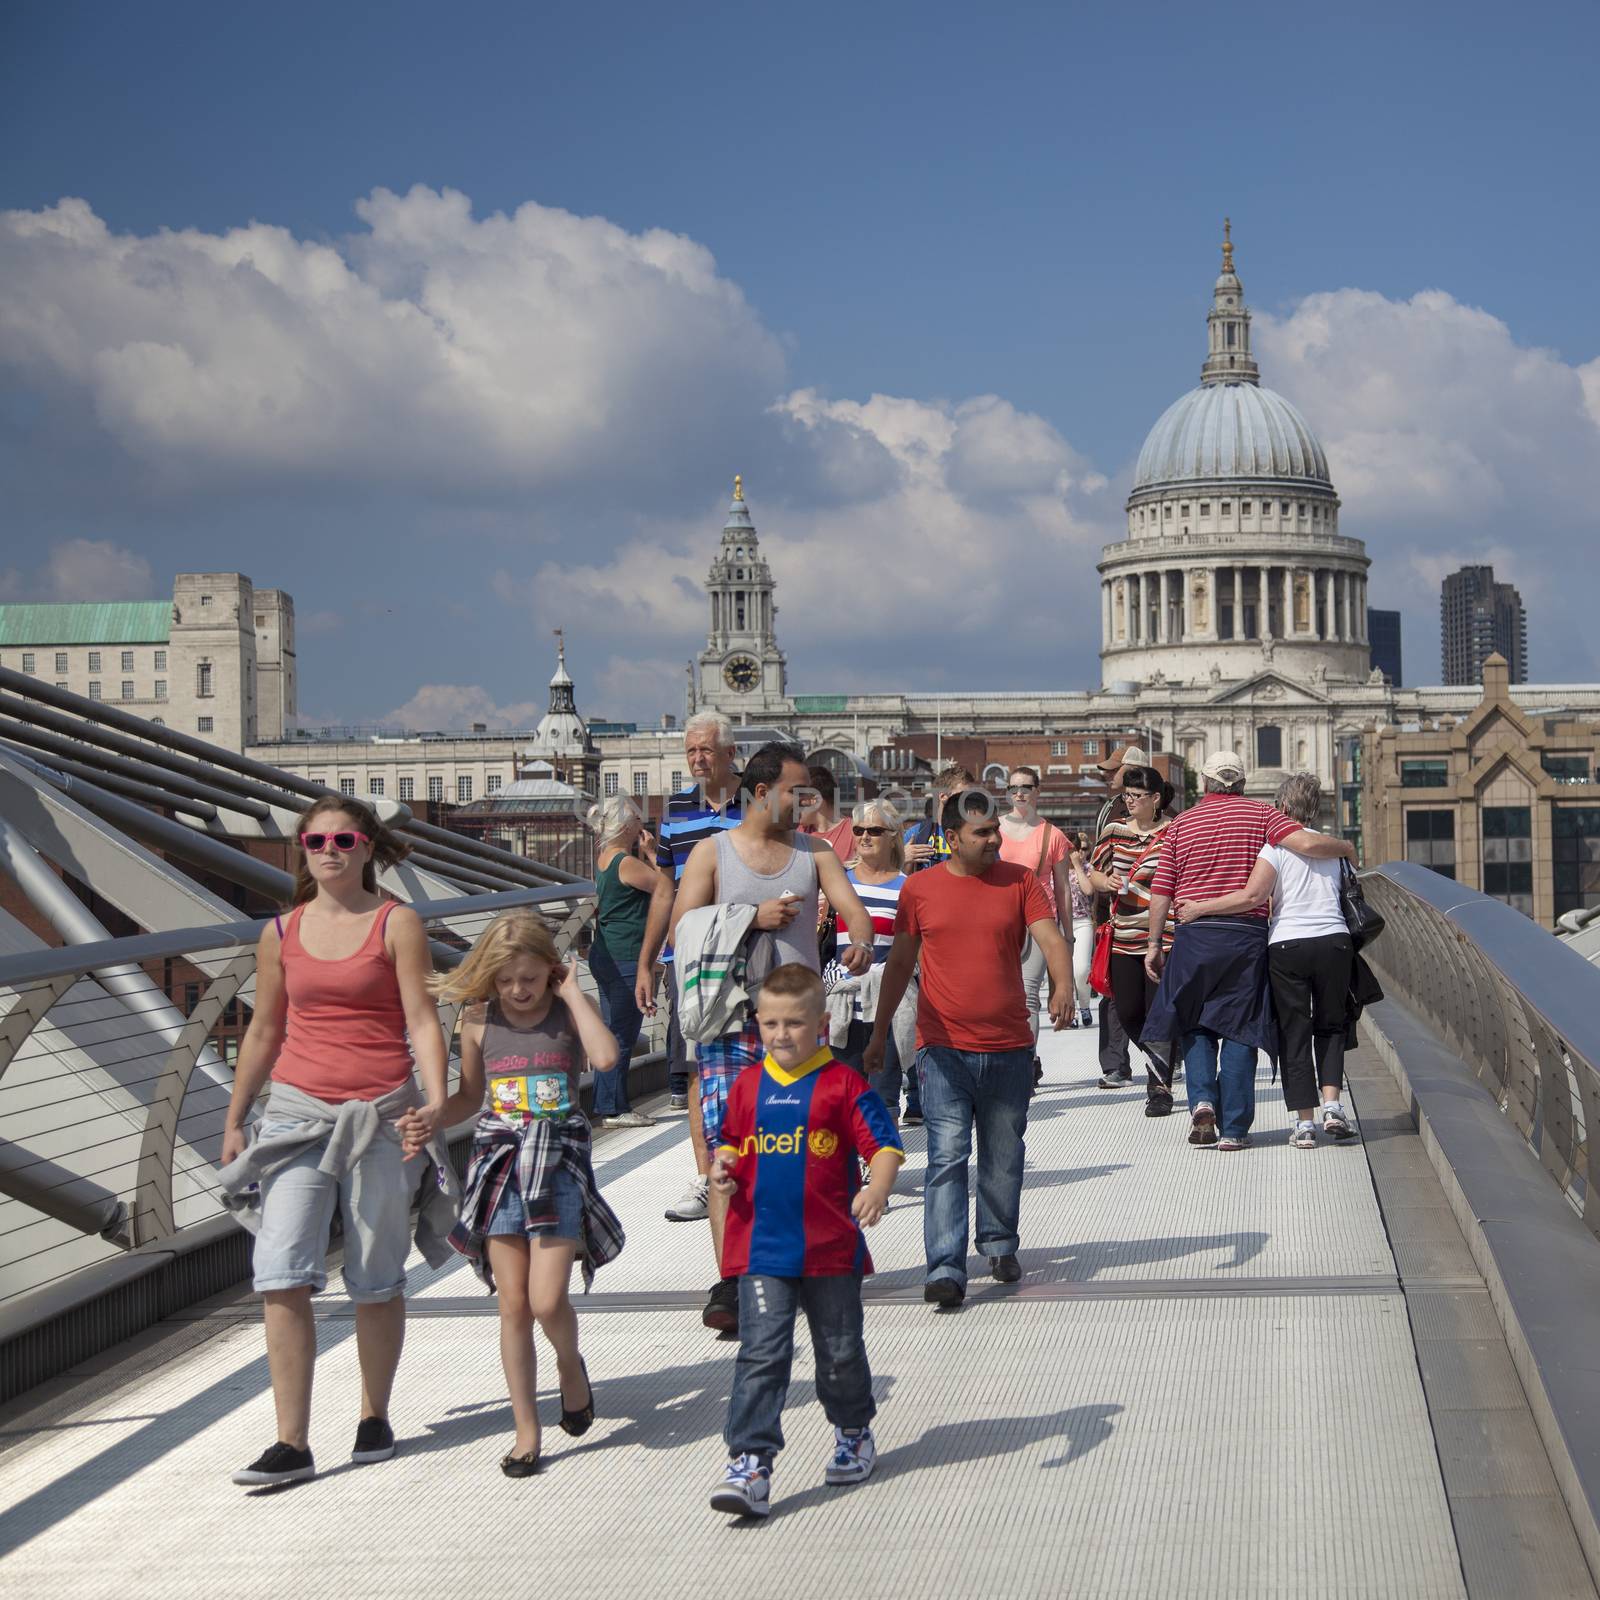 View on St Paul's Cathedral in London from Millennium bridge crowded with people.